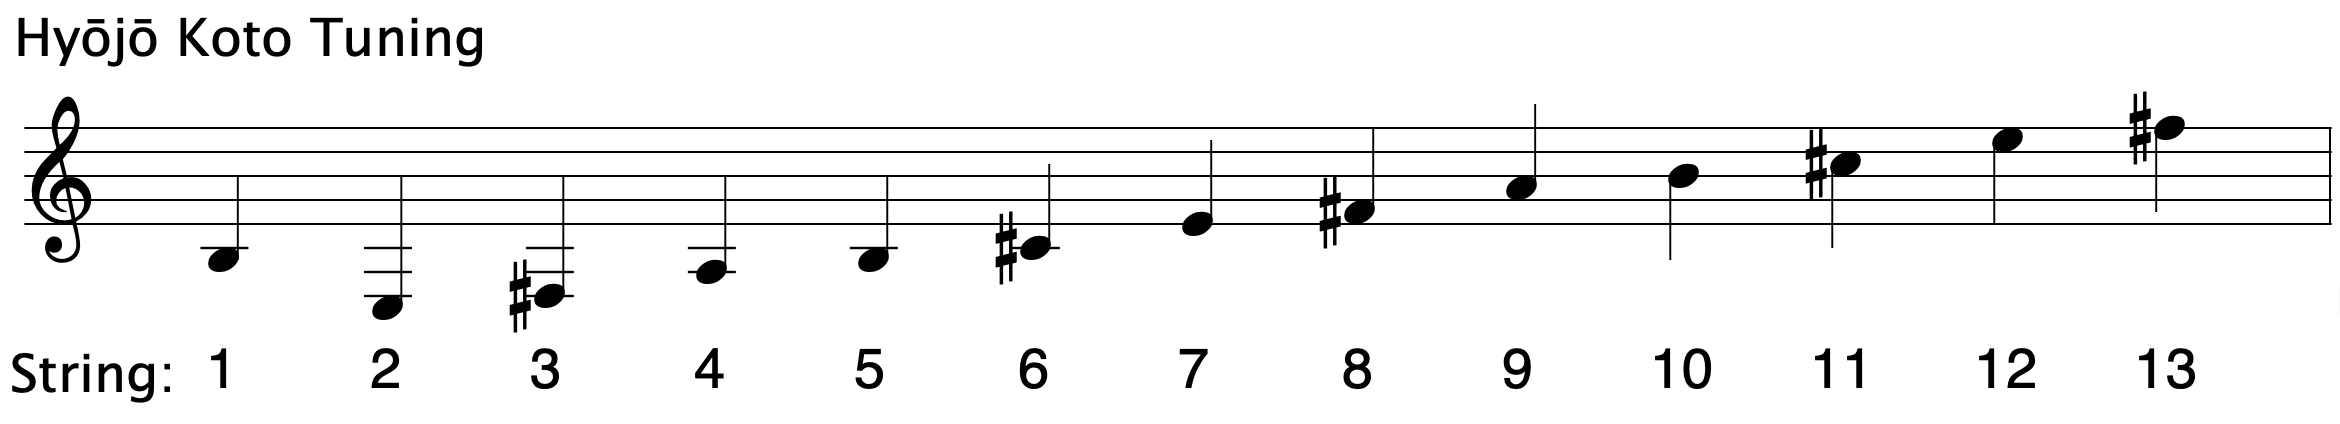  Hyōjō Koto Tuning ranging from E3 to F5# with A’s 